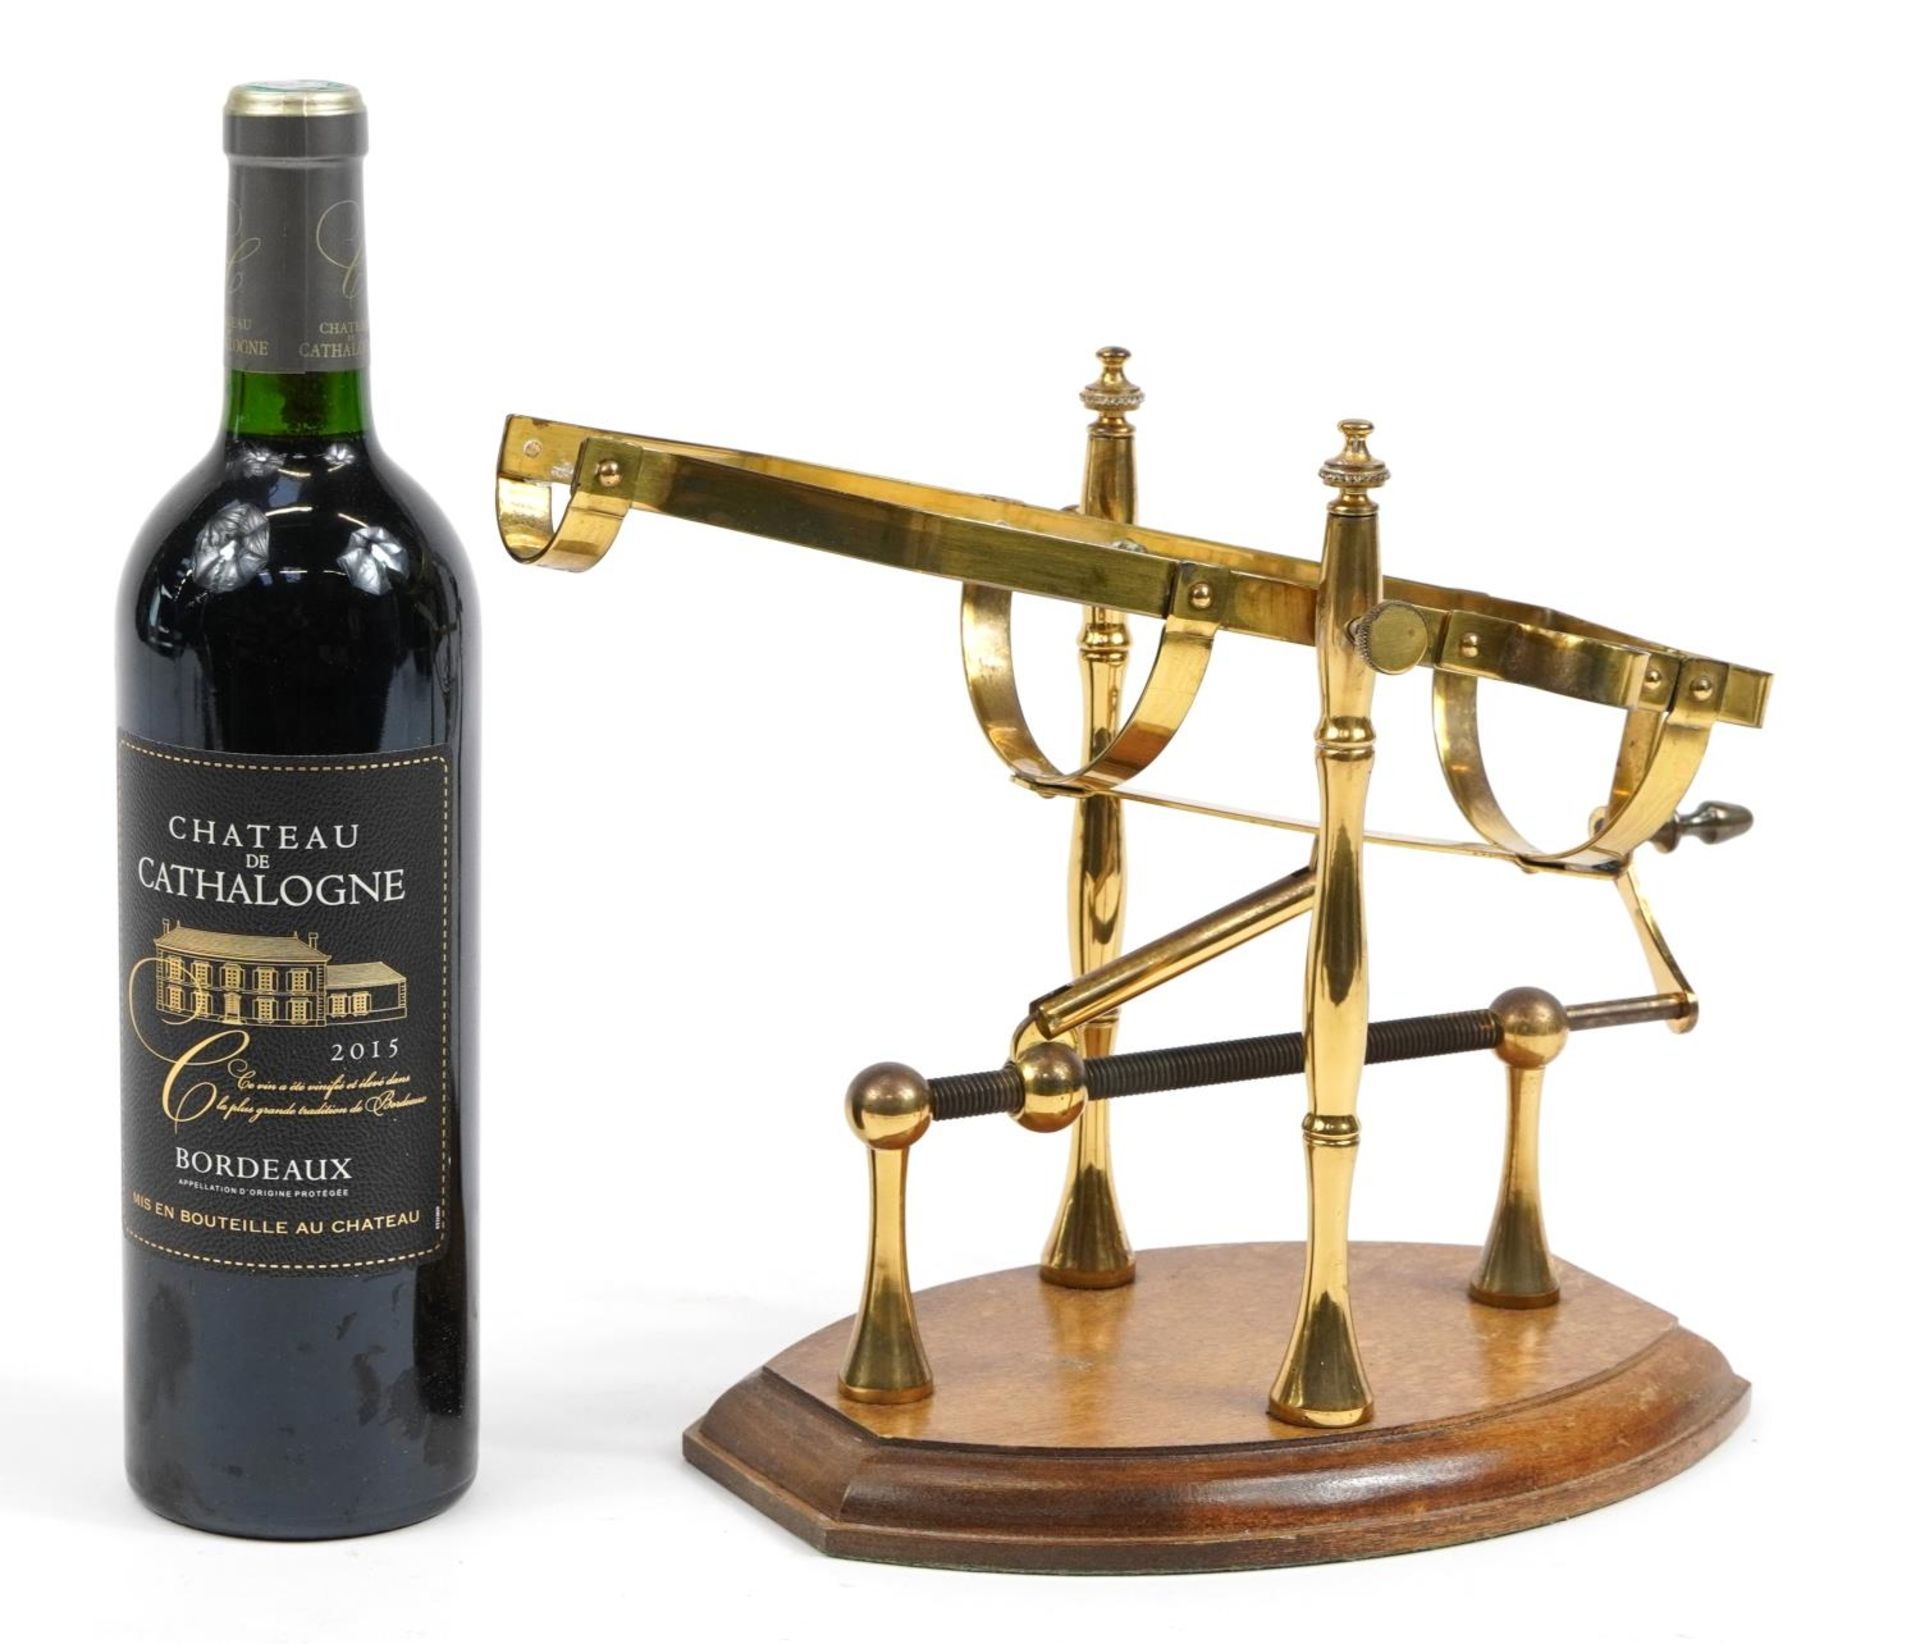 Brass mechanical action wine bottle stand/pourer on wooden base with a bottle of 2015 Chateau de - Image 4 of 4